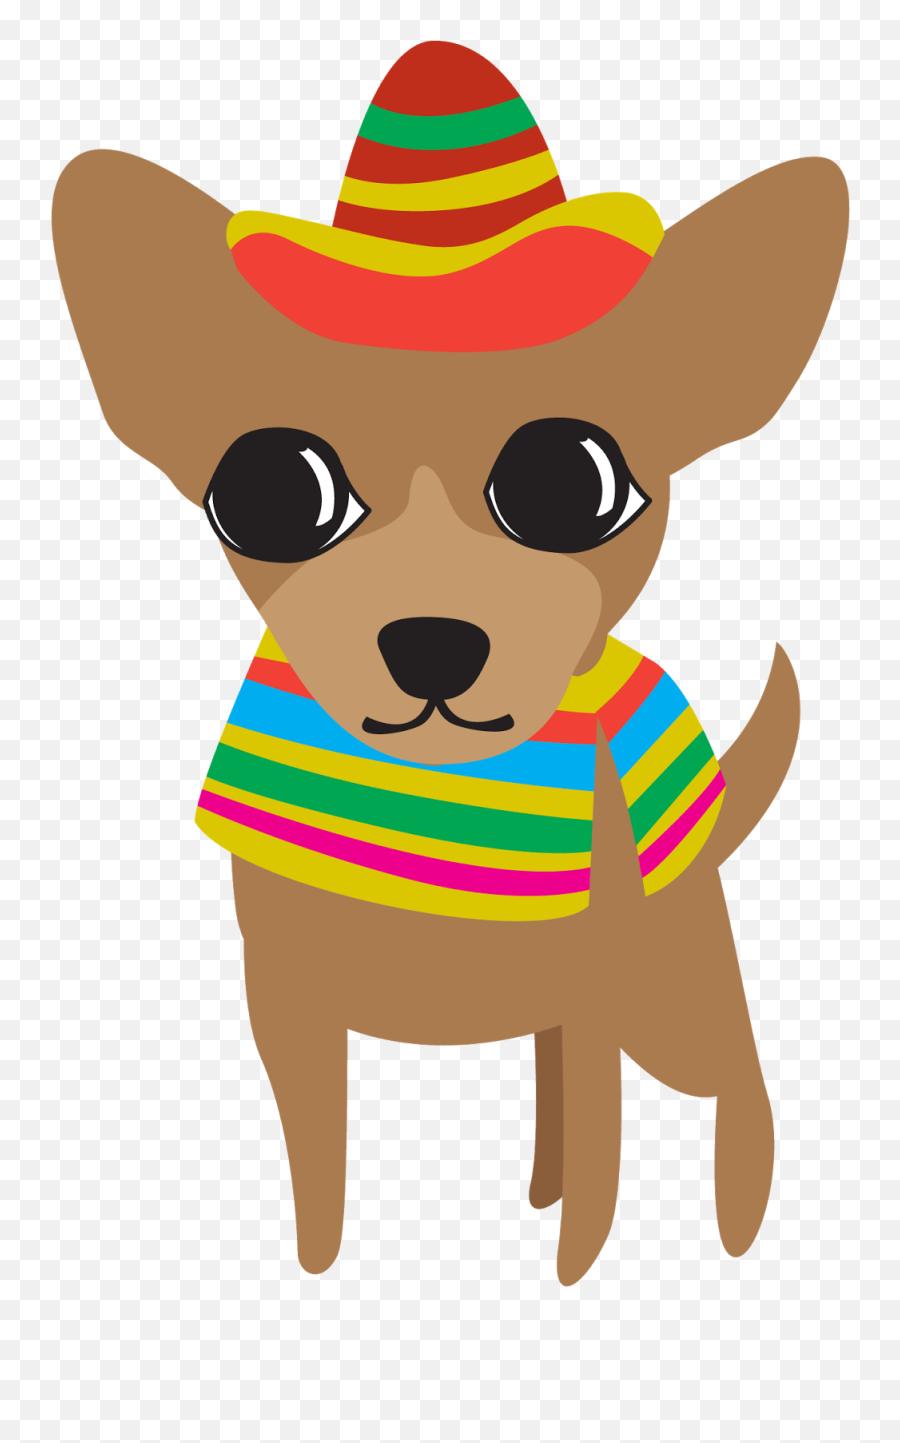 Mexican Clipart Chihuahua Mexican Picture 2962699 Mexican - Chihuahua Cartoon With Sombrero Emoji,Mexican Clipart